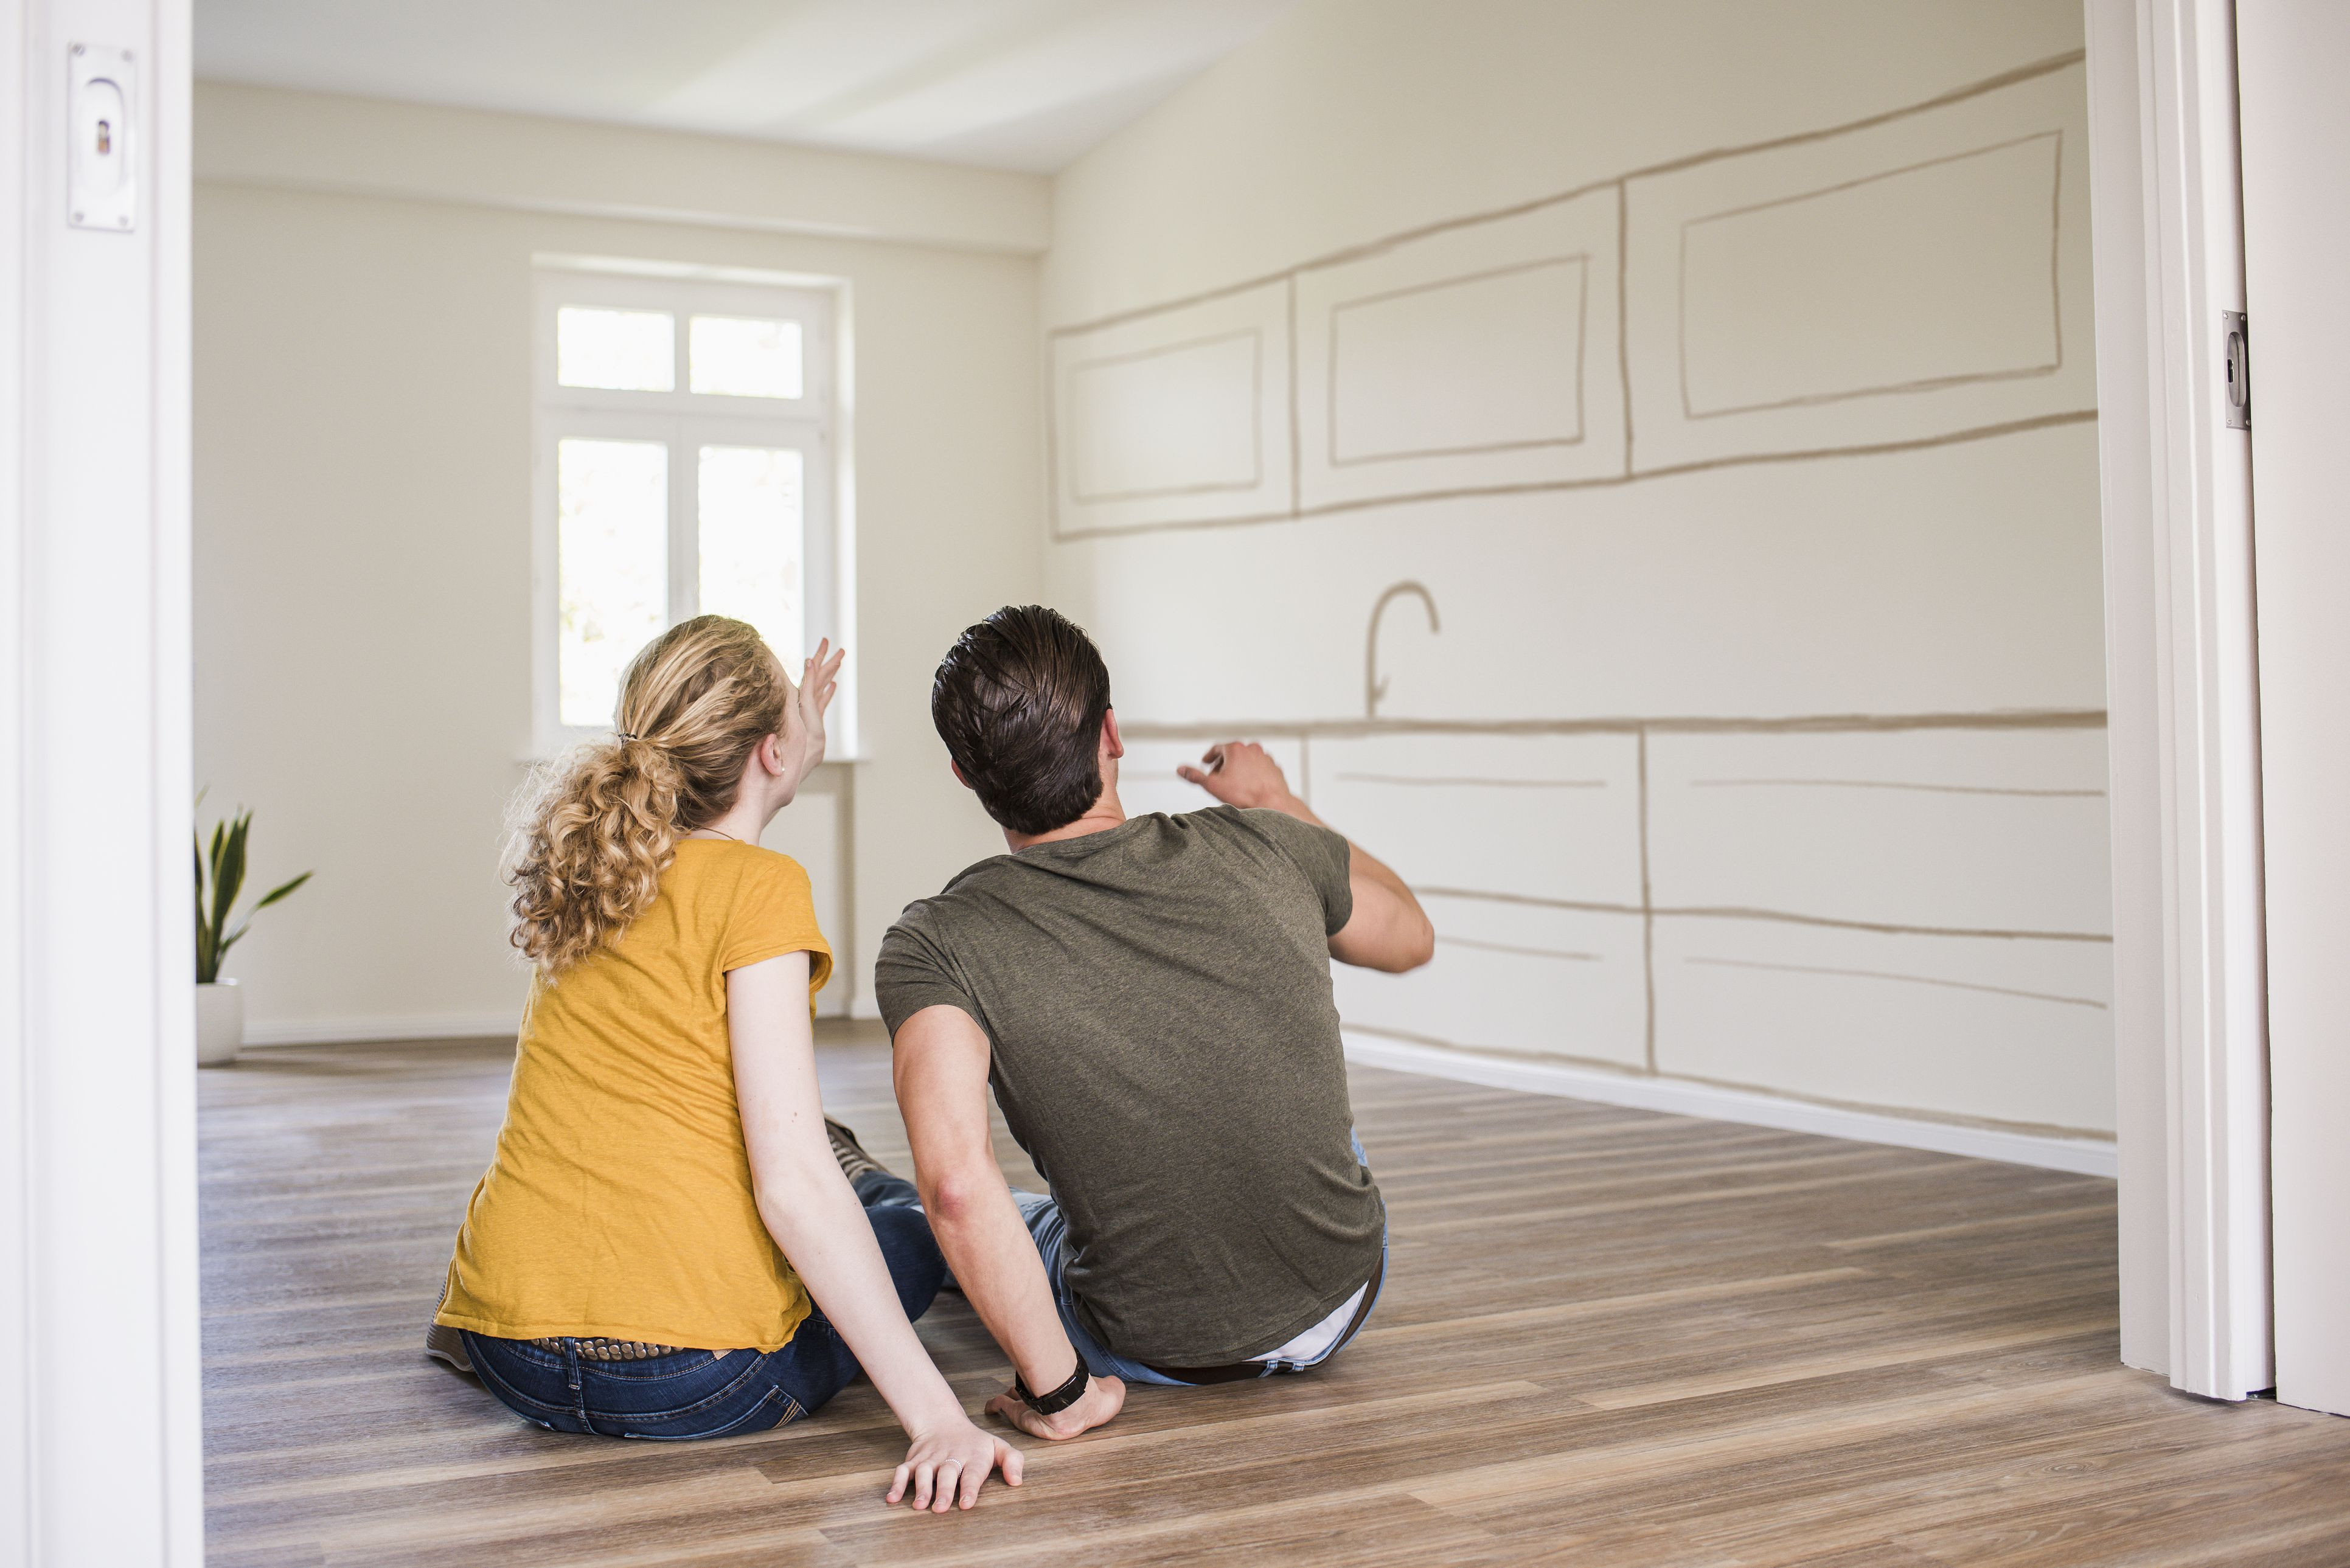 hardwood floor repair nyc of make money flipping short sales inside young couple in new home sitting on floor thinking about interior design 748332925 5ab54bfc1f4e130037503648